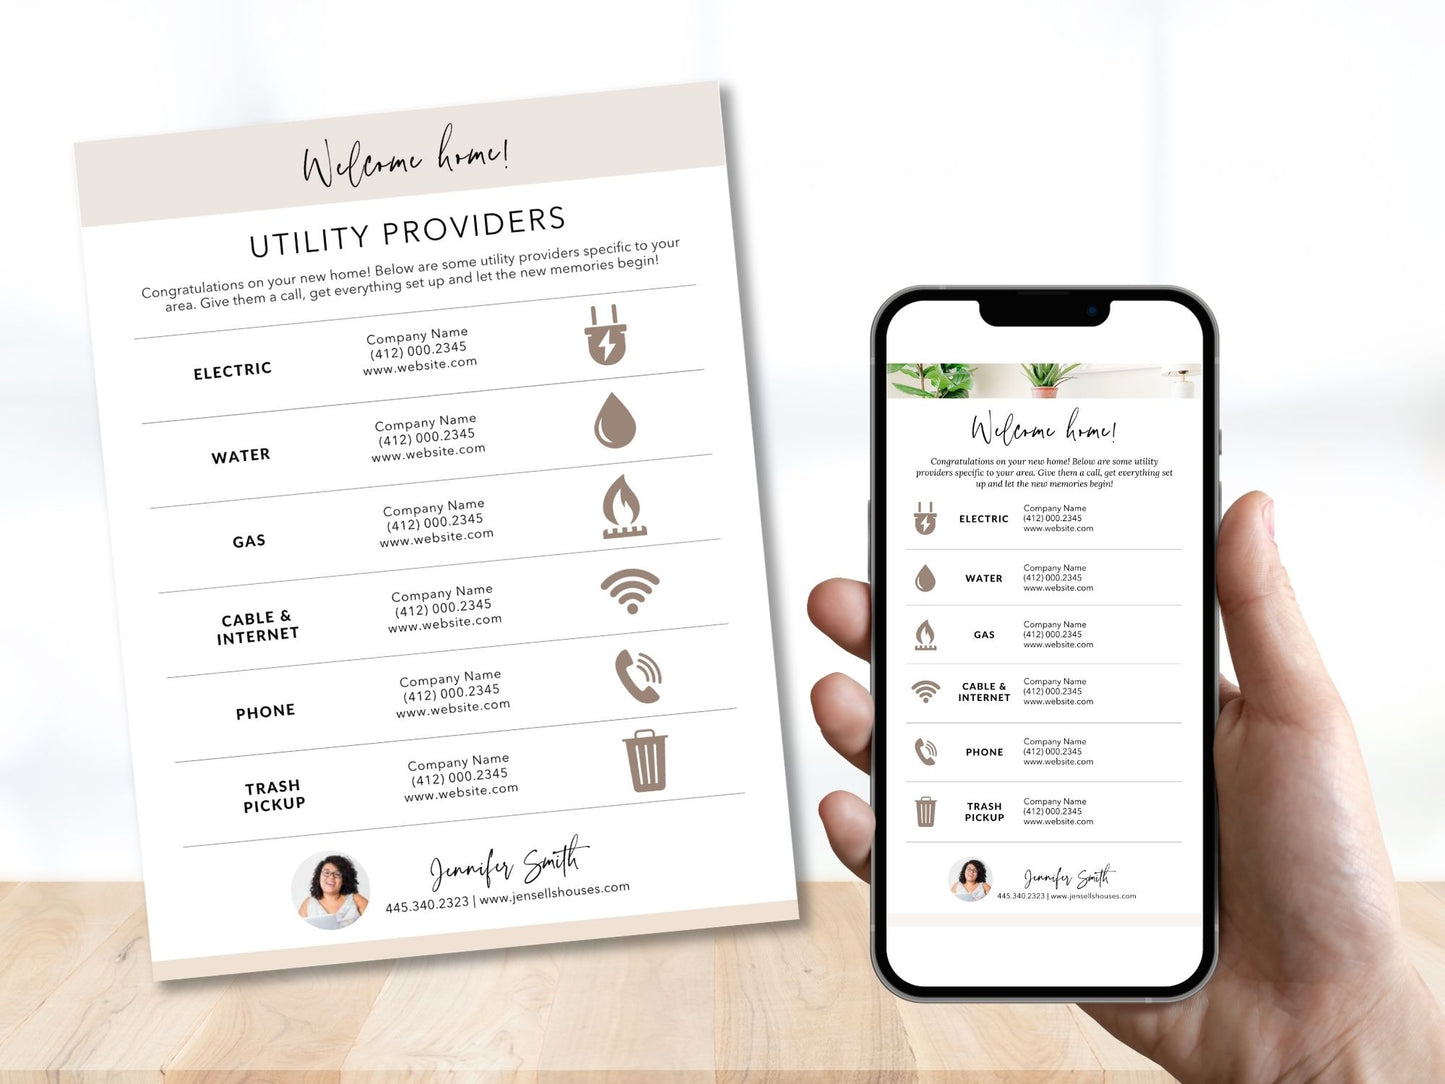 Utility Providers List Textable and Flyer Bundle - Simplify home transitions with an informative Utility Providers Flyer and a practical Textable Utility Providers guide for managing essential services seamlessly